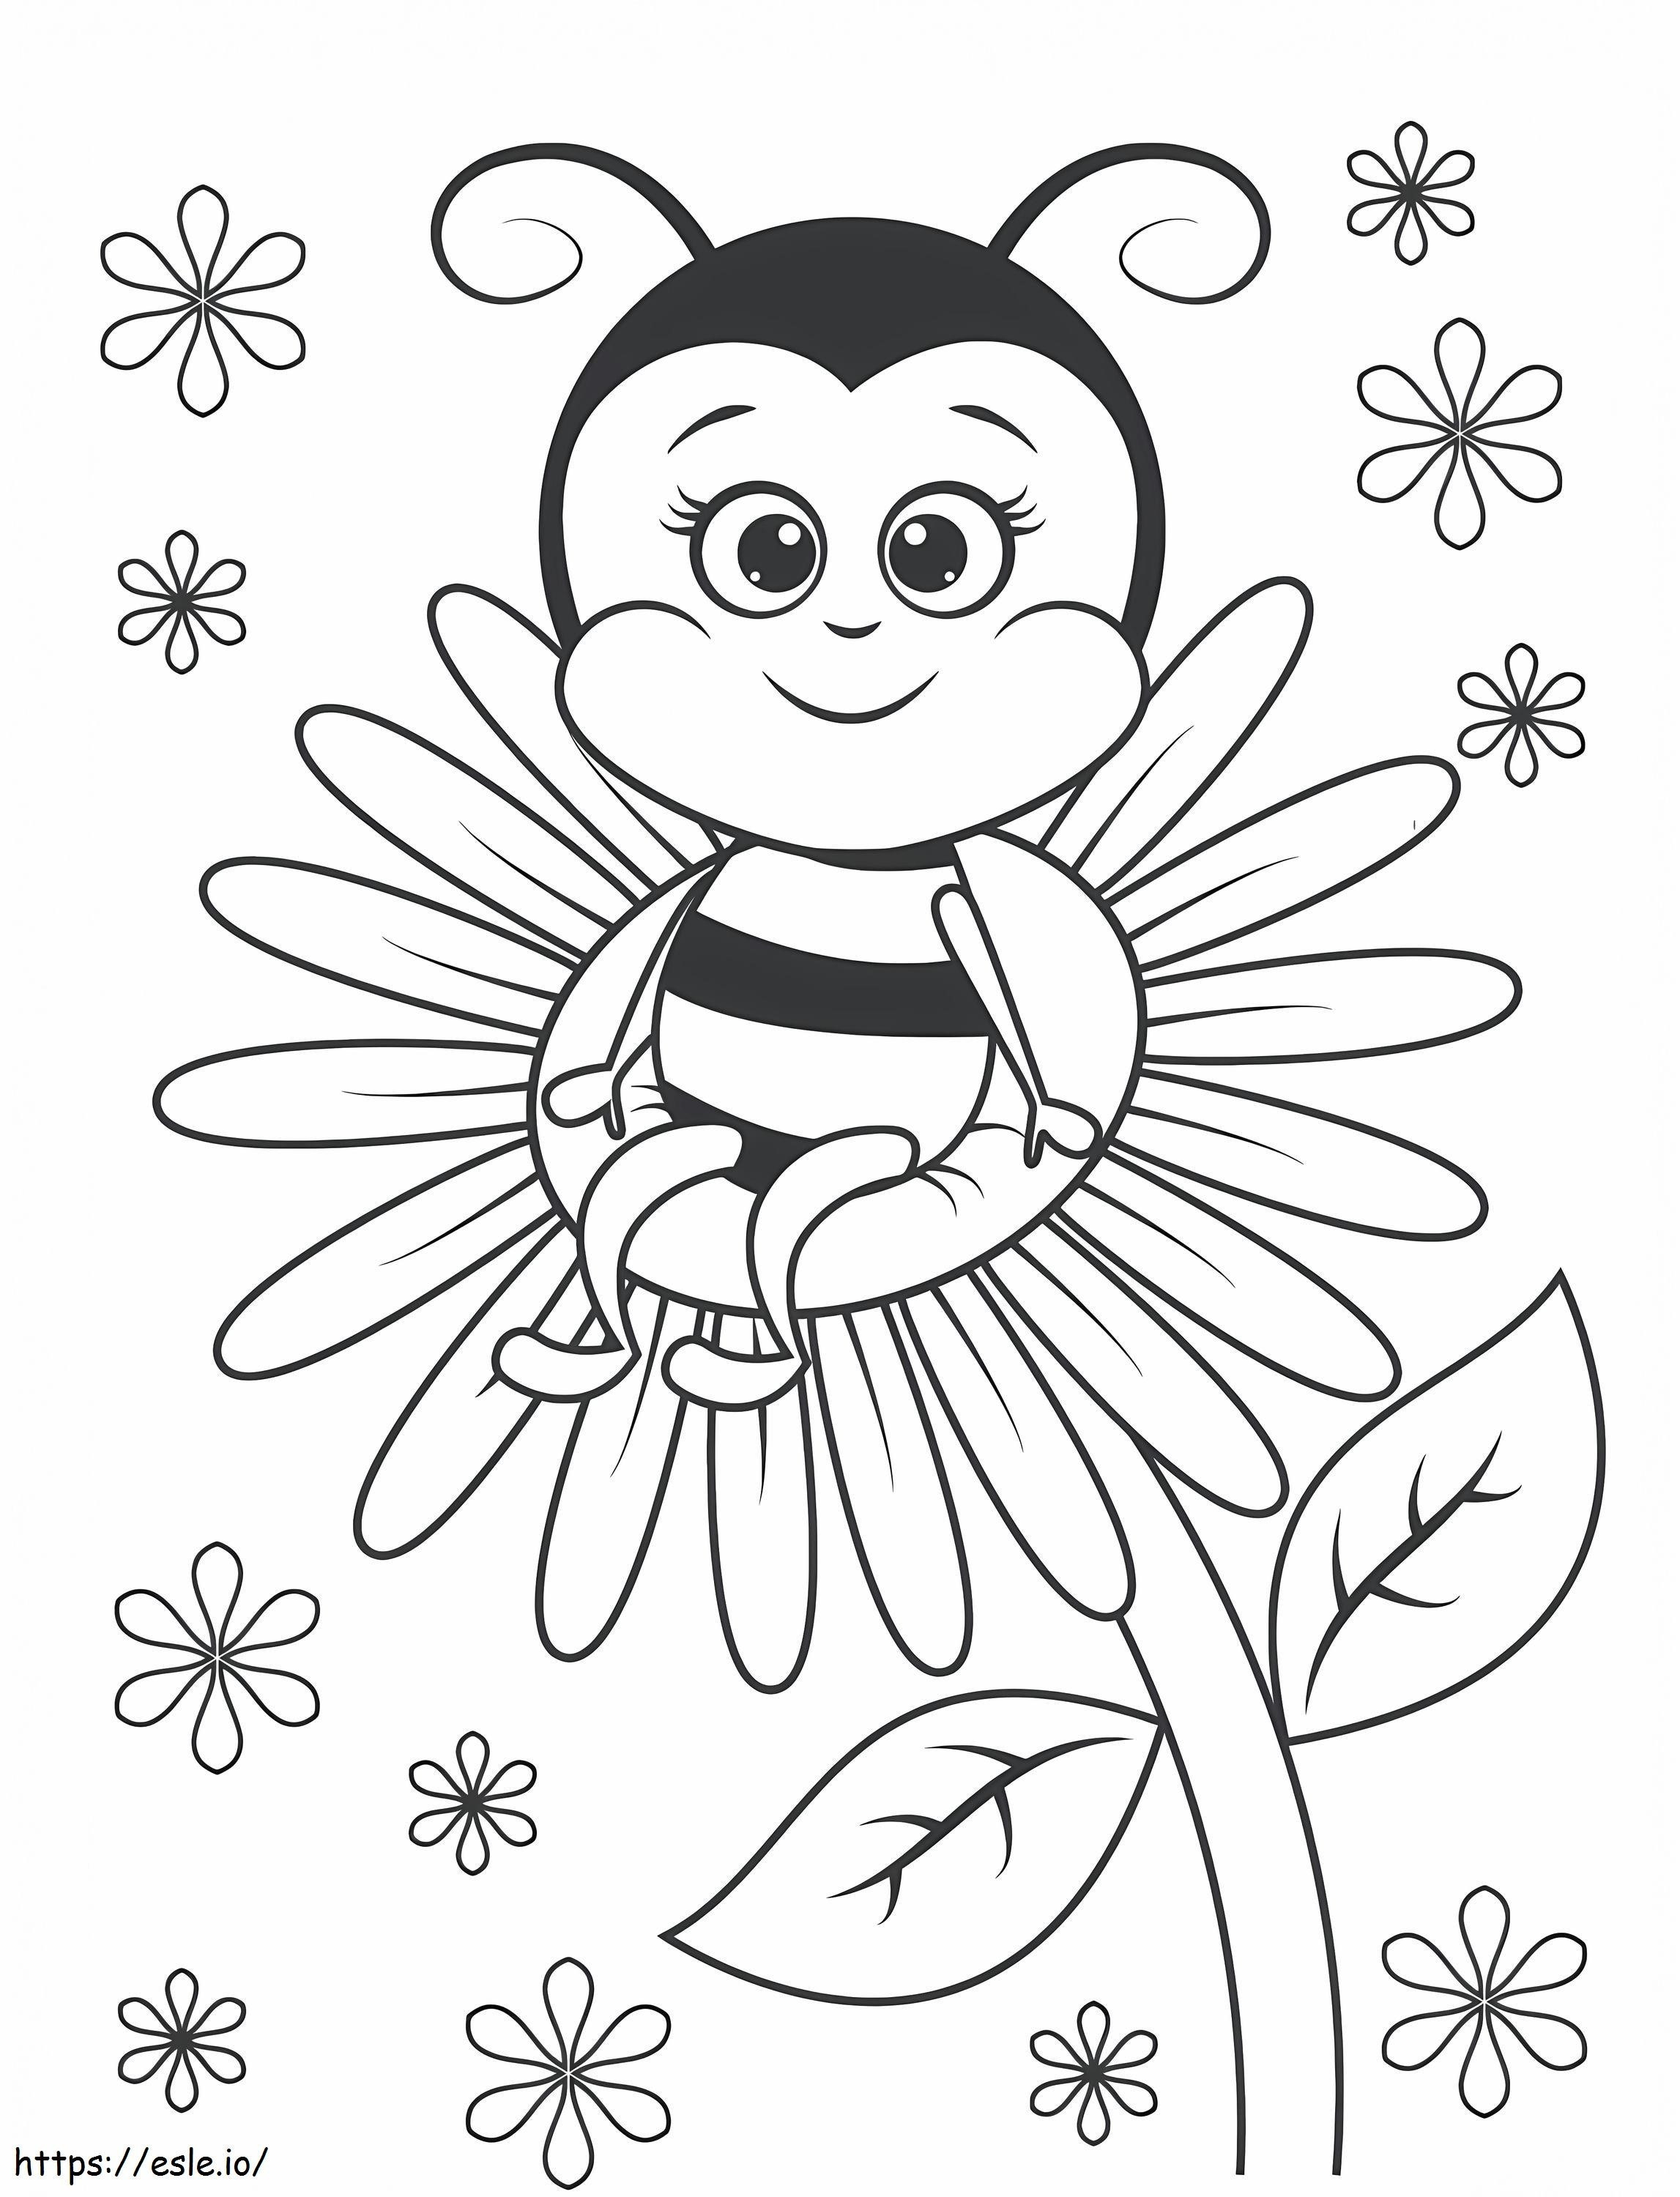 Bee Sitting On Sunflower coloring page